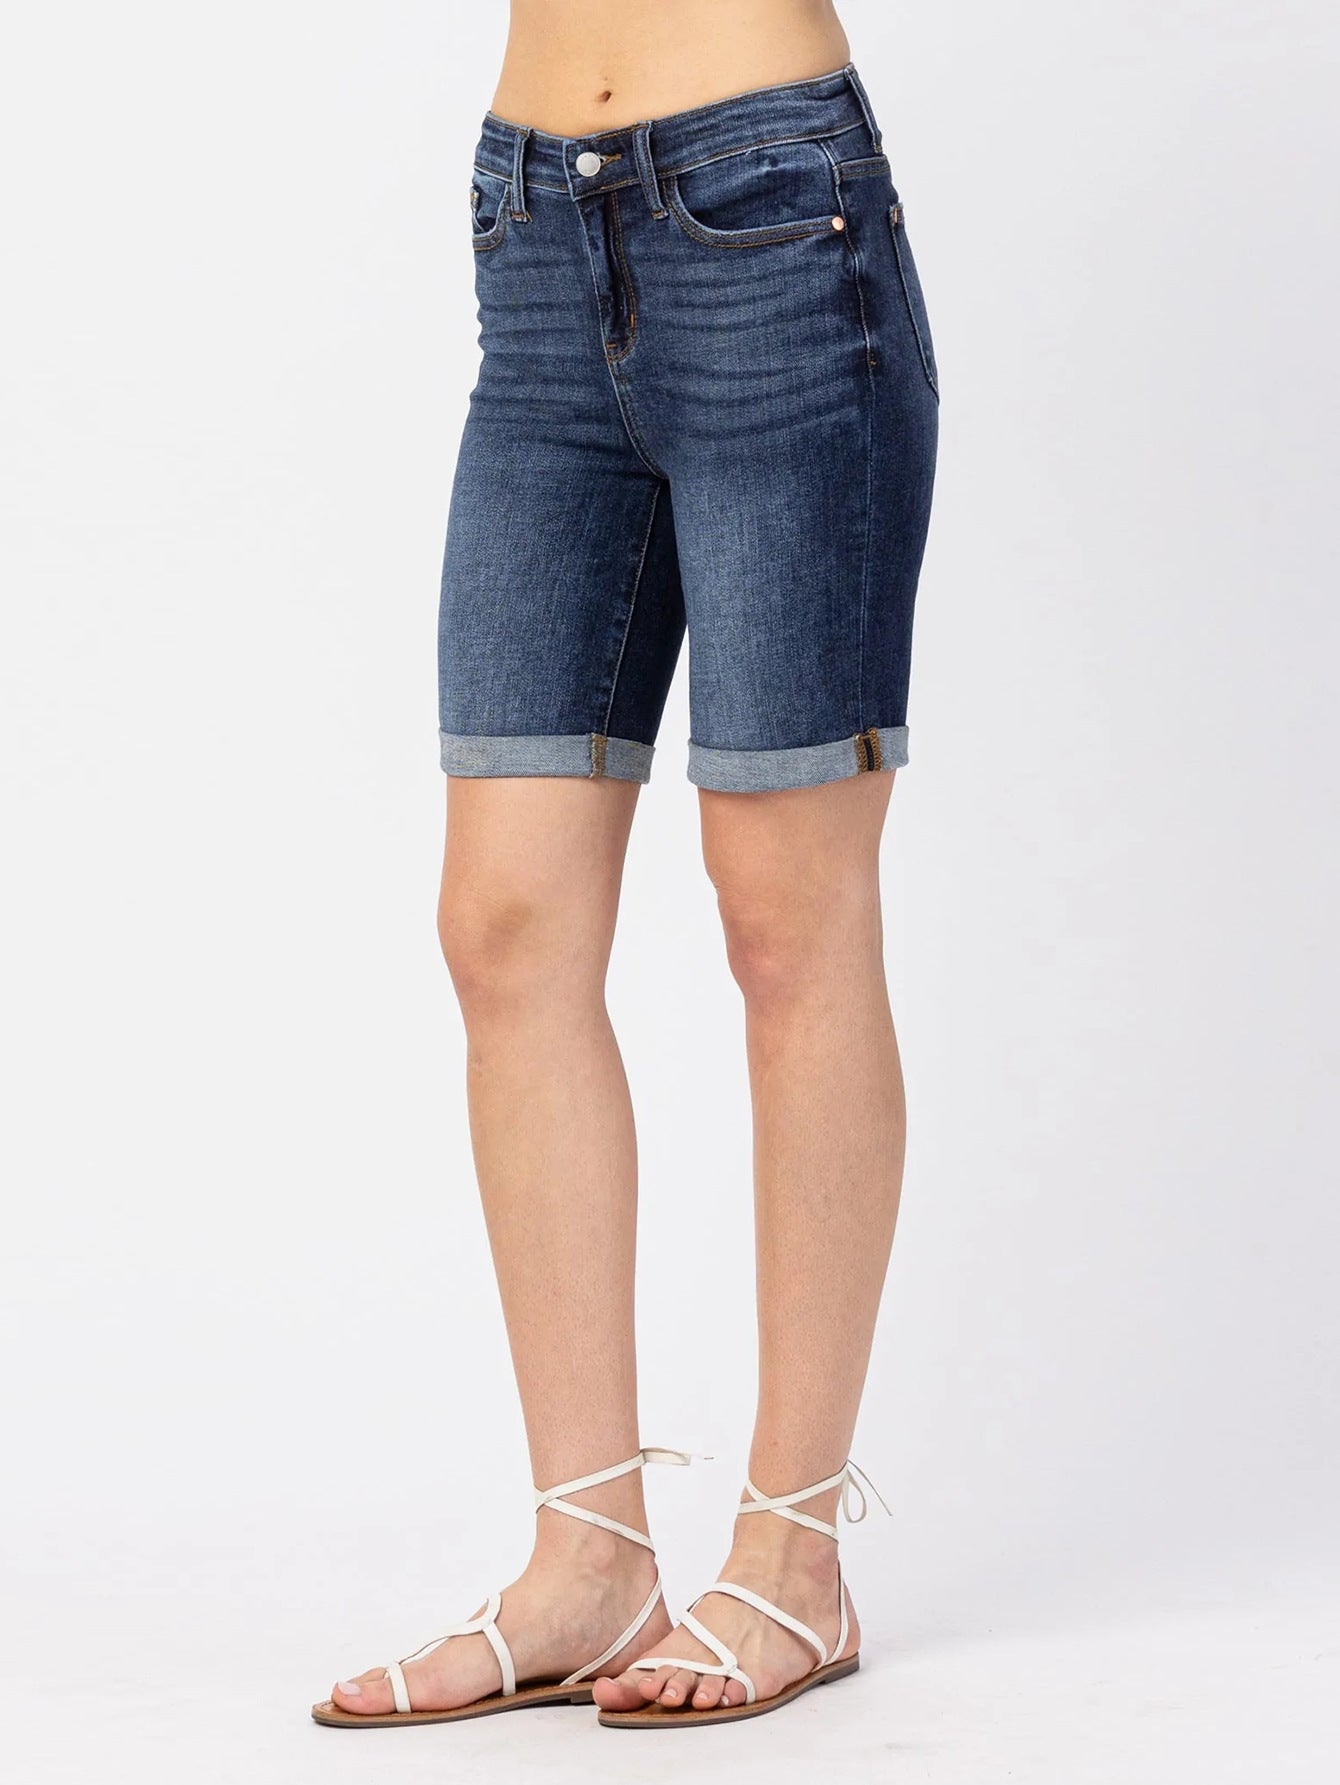 Summer Casual Slim Fit Curling Women Jeans Shorts